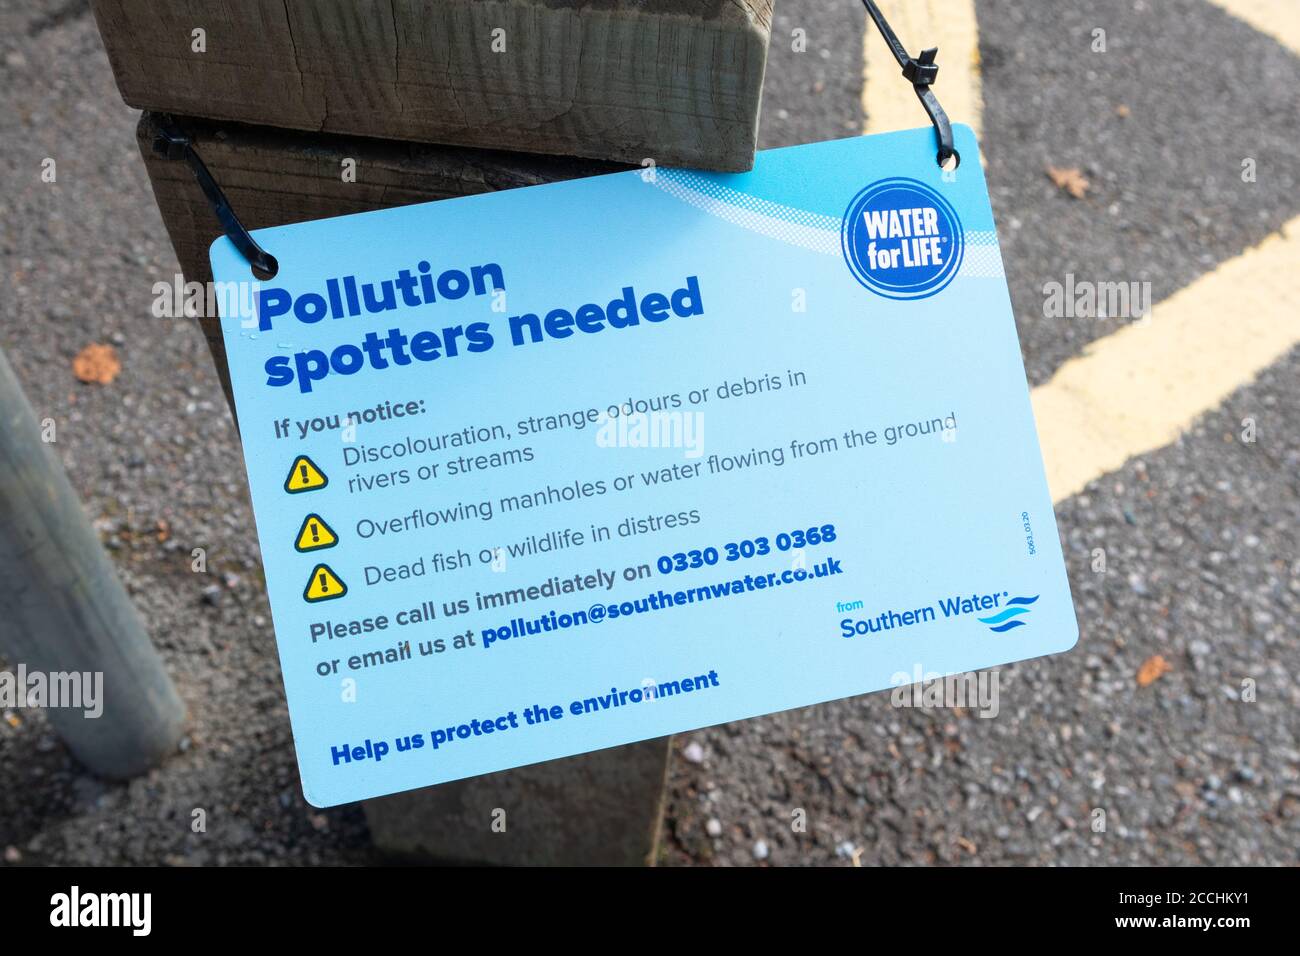 Southern water sign, pollution spotters needed, kent, uk Stock Photo